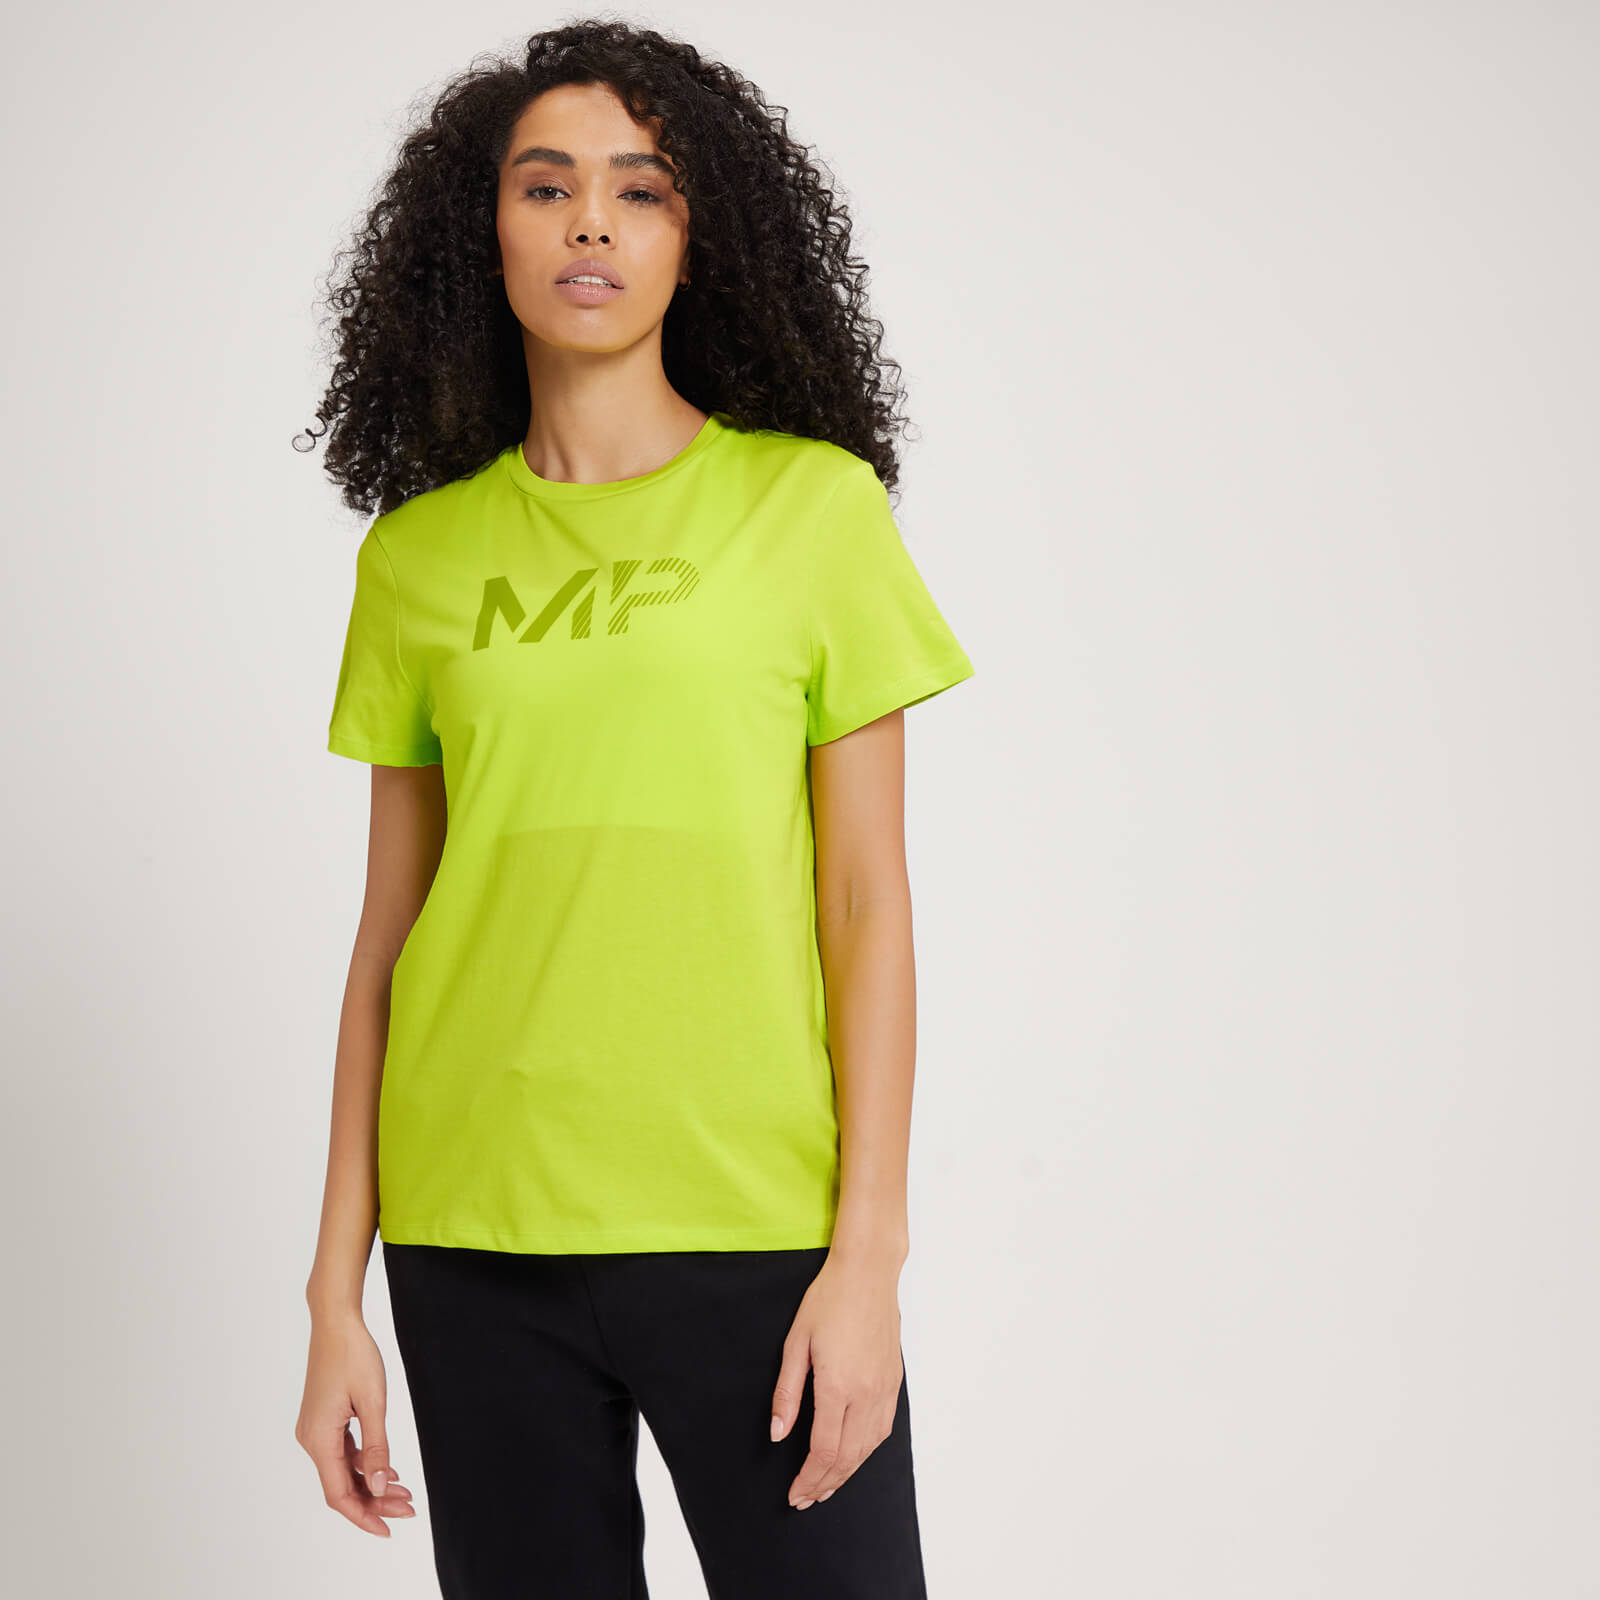 MP Women's Fade Graphic T-Shirt - Lime - XS